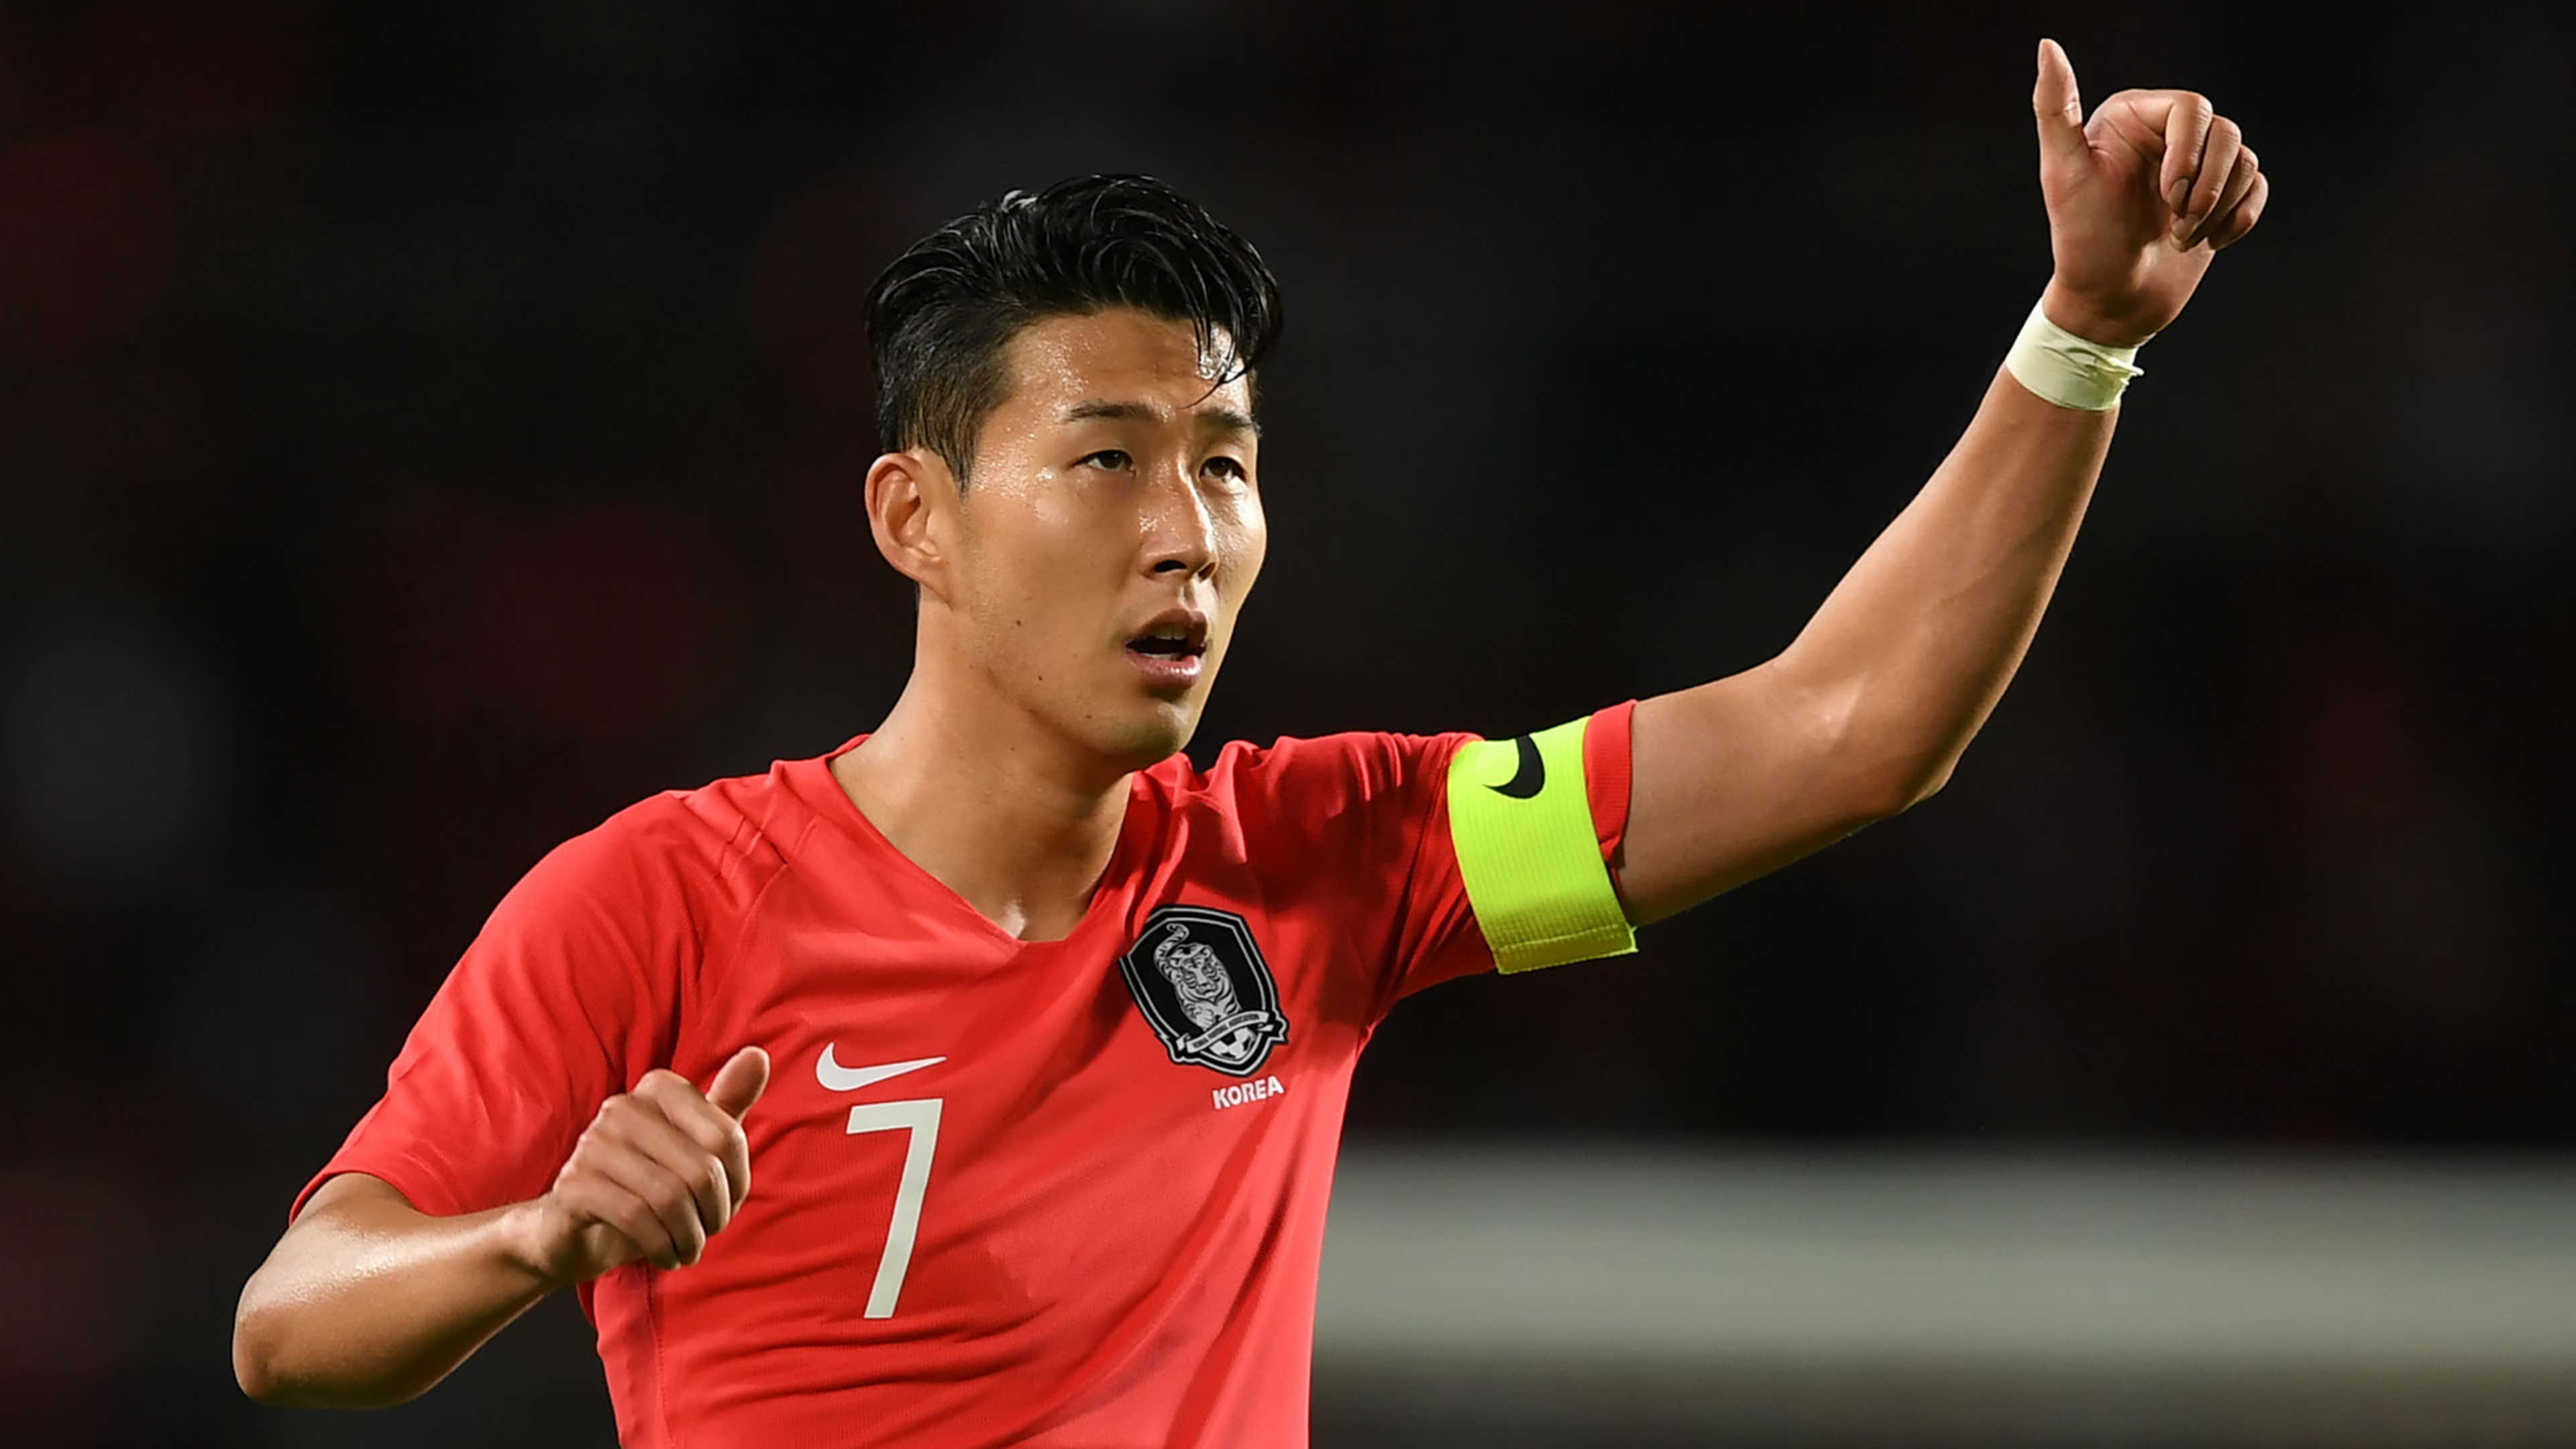 Did you know? Against whom did Tottenham Hotspur superstar Son Heung-min  score his first international goal?